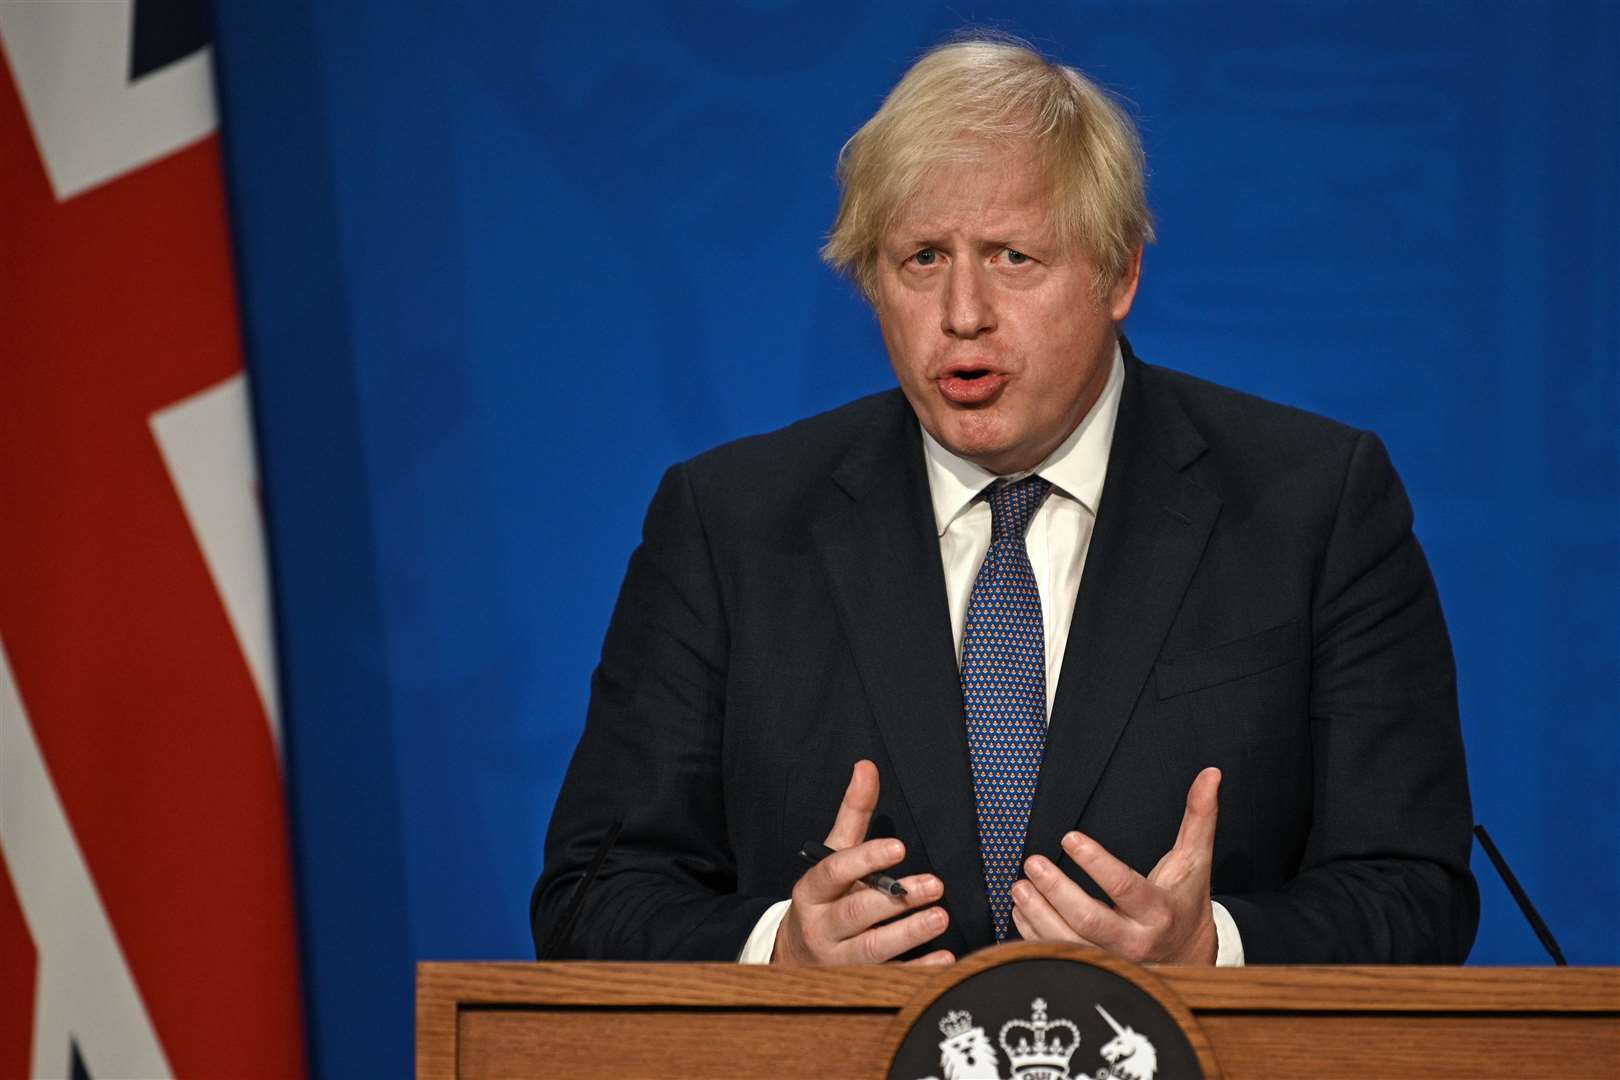 Prime Minister Boris Johnson during a media briefing in Downing Street (Daniel Leal-Olivas/PA)